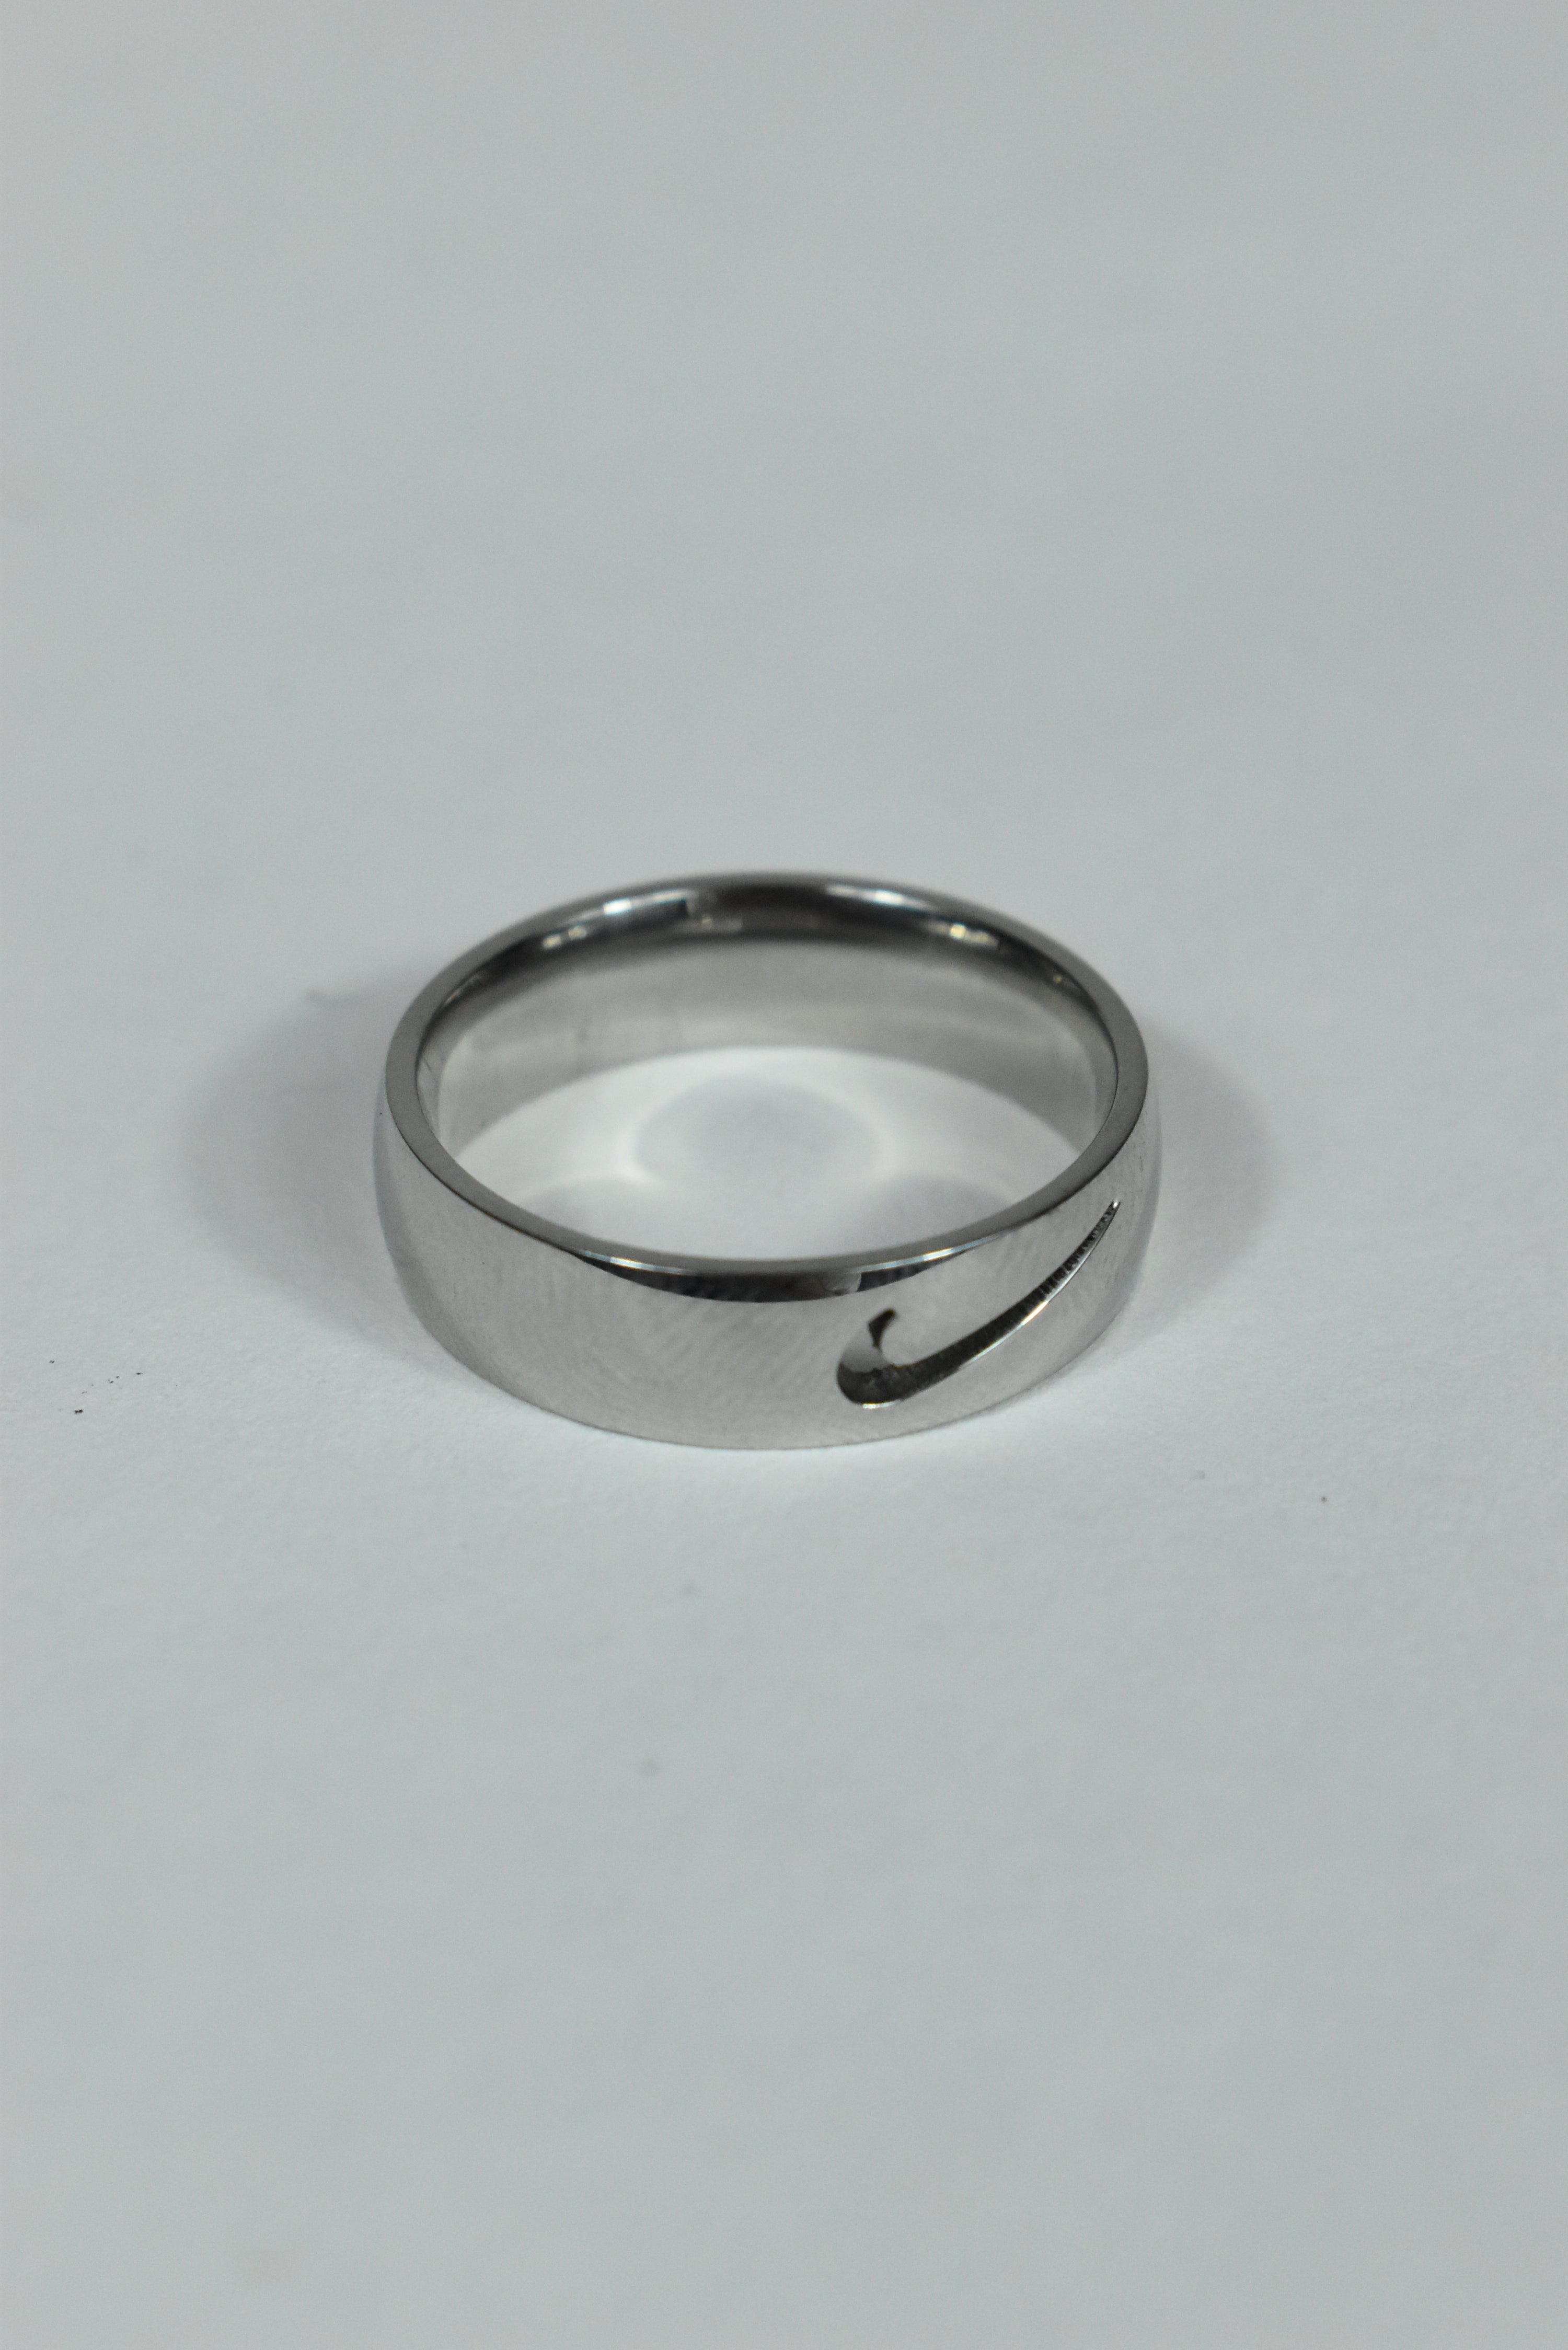 New Unisex Nike Cutout Ring Silver